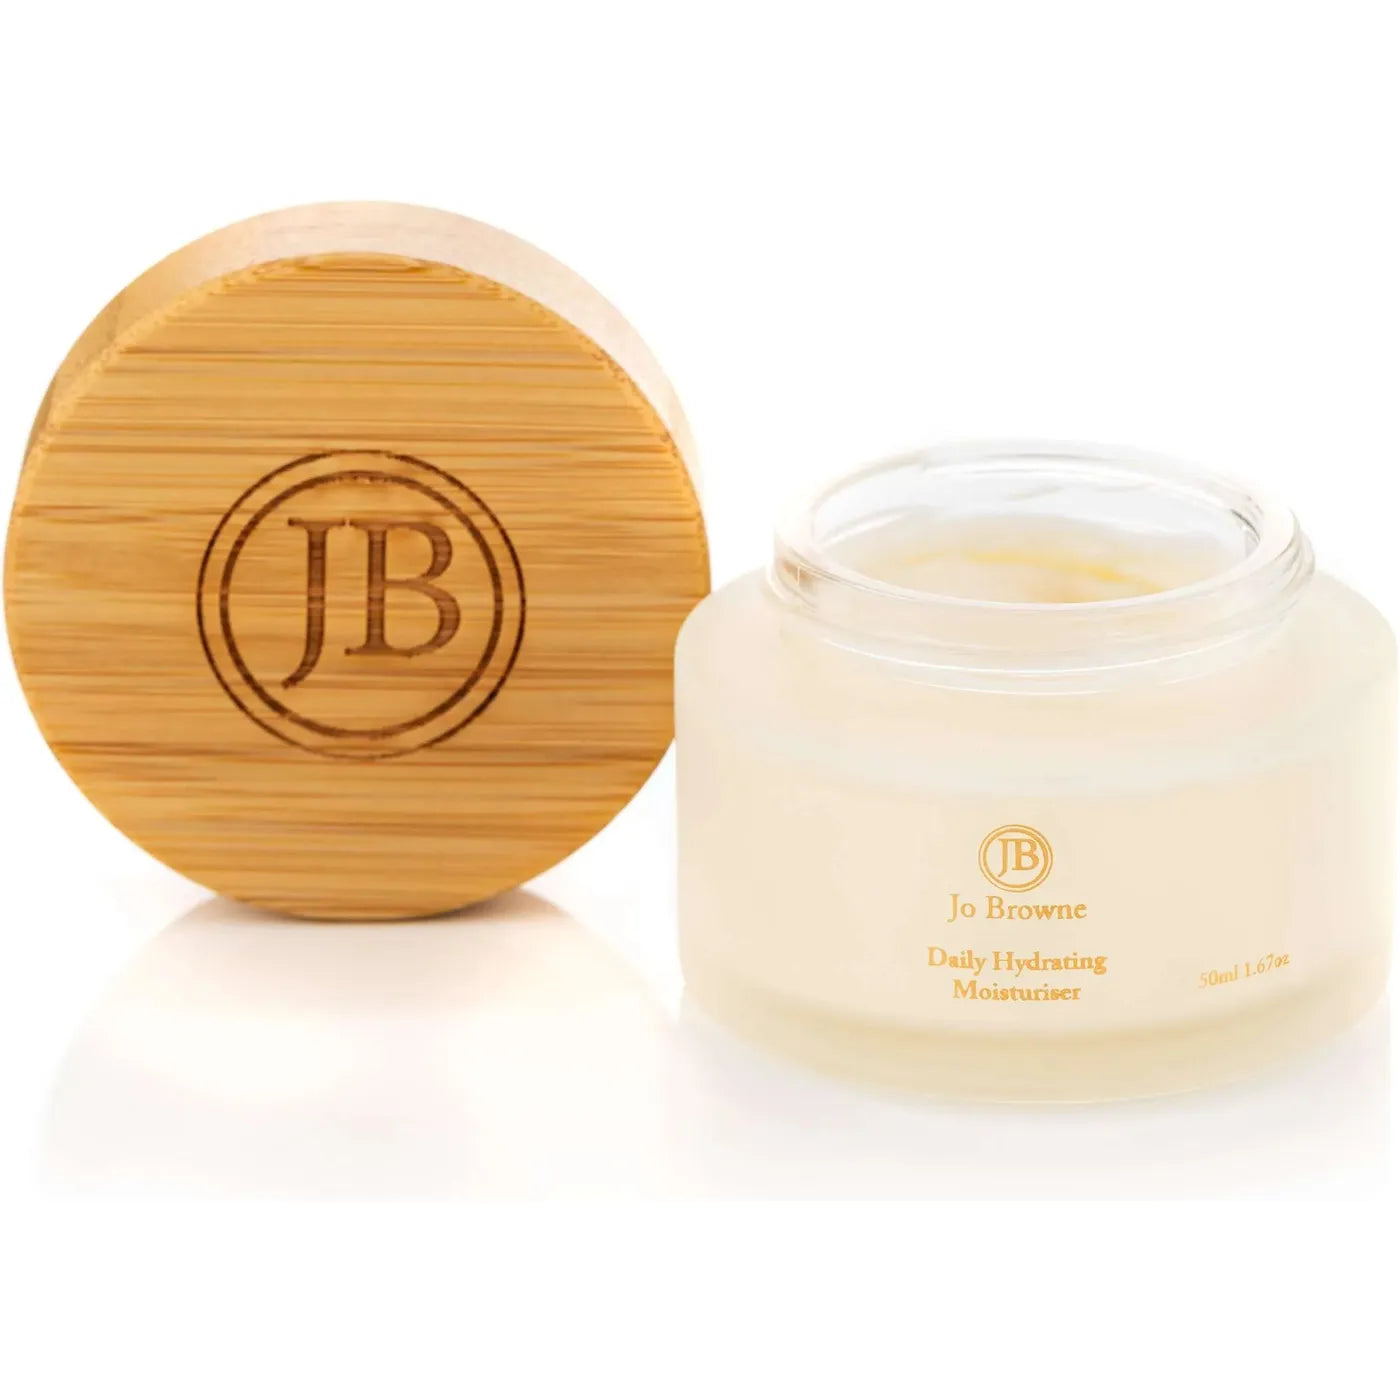 The Gift of Skincare - Jo Browne